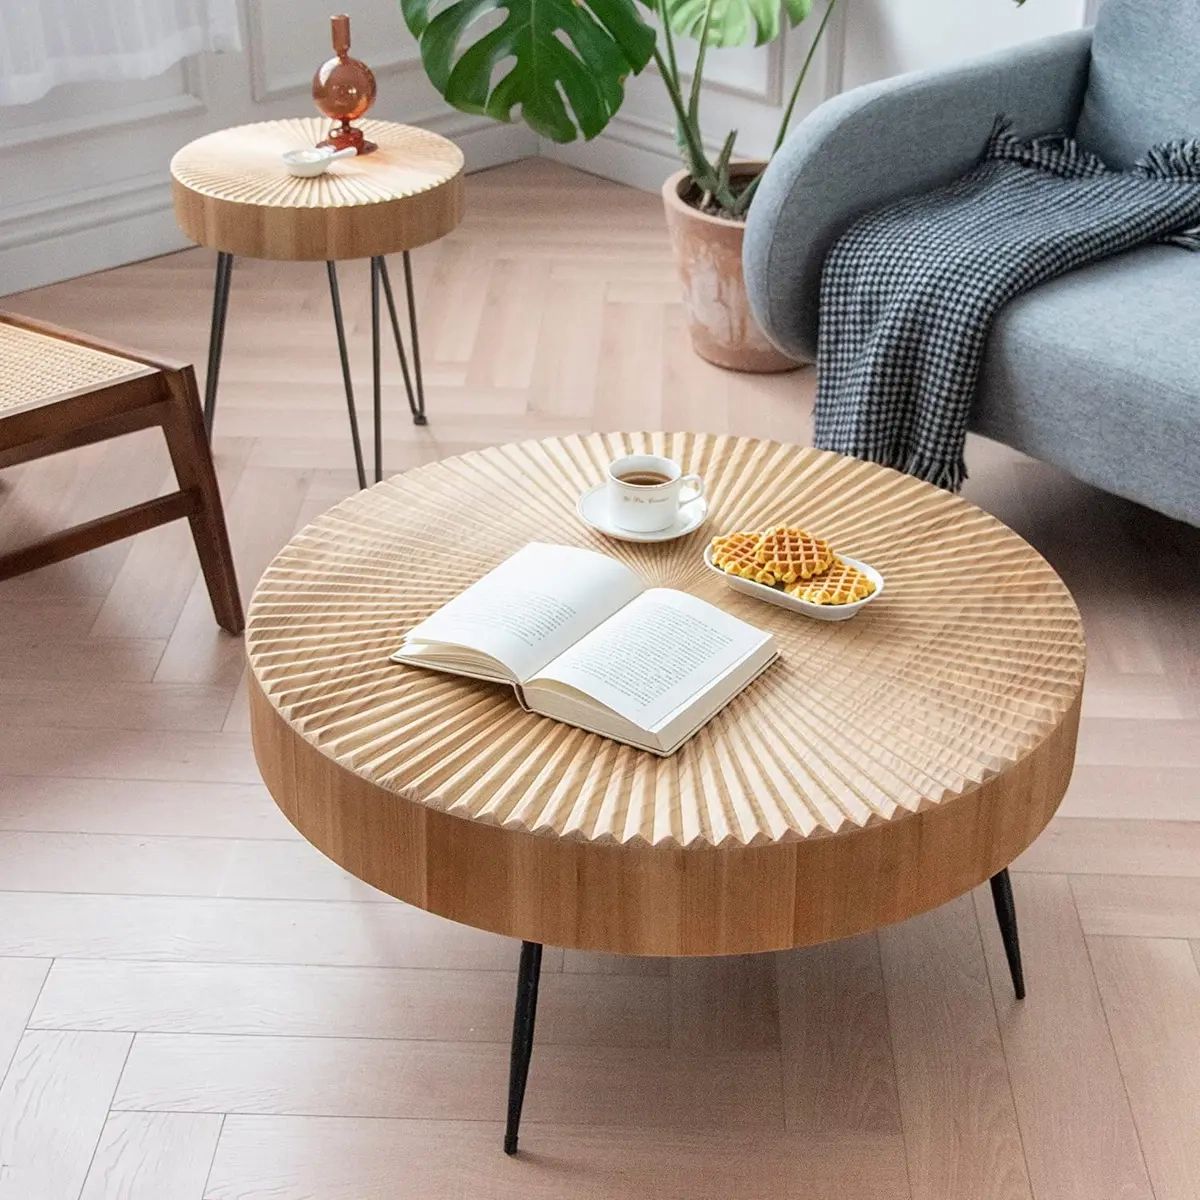 2 Piece Modern Farmhouse Living Room Coffee Table Set, Nesting Table Round  With | Ebay In Modern Farmhouse Coffee Table Sets (Photo 2 of 15)